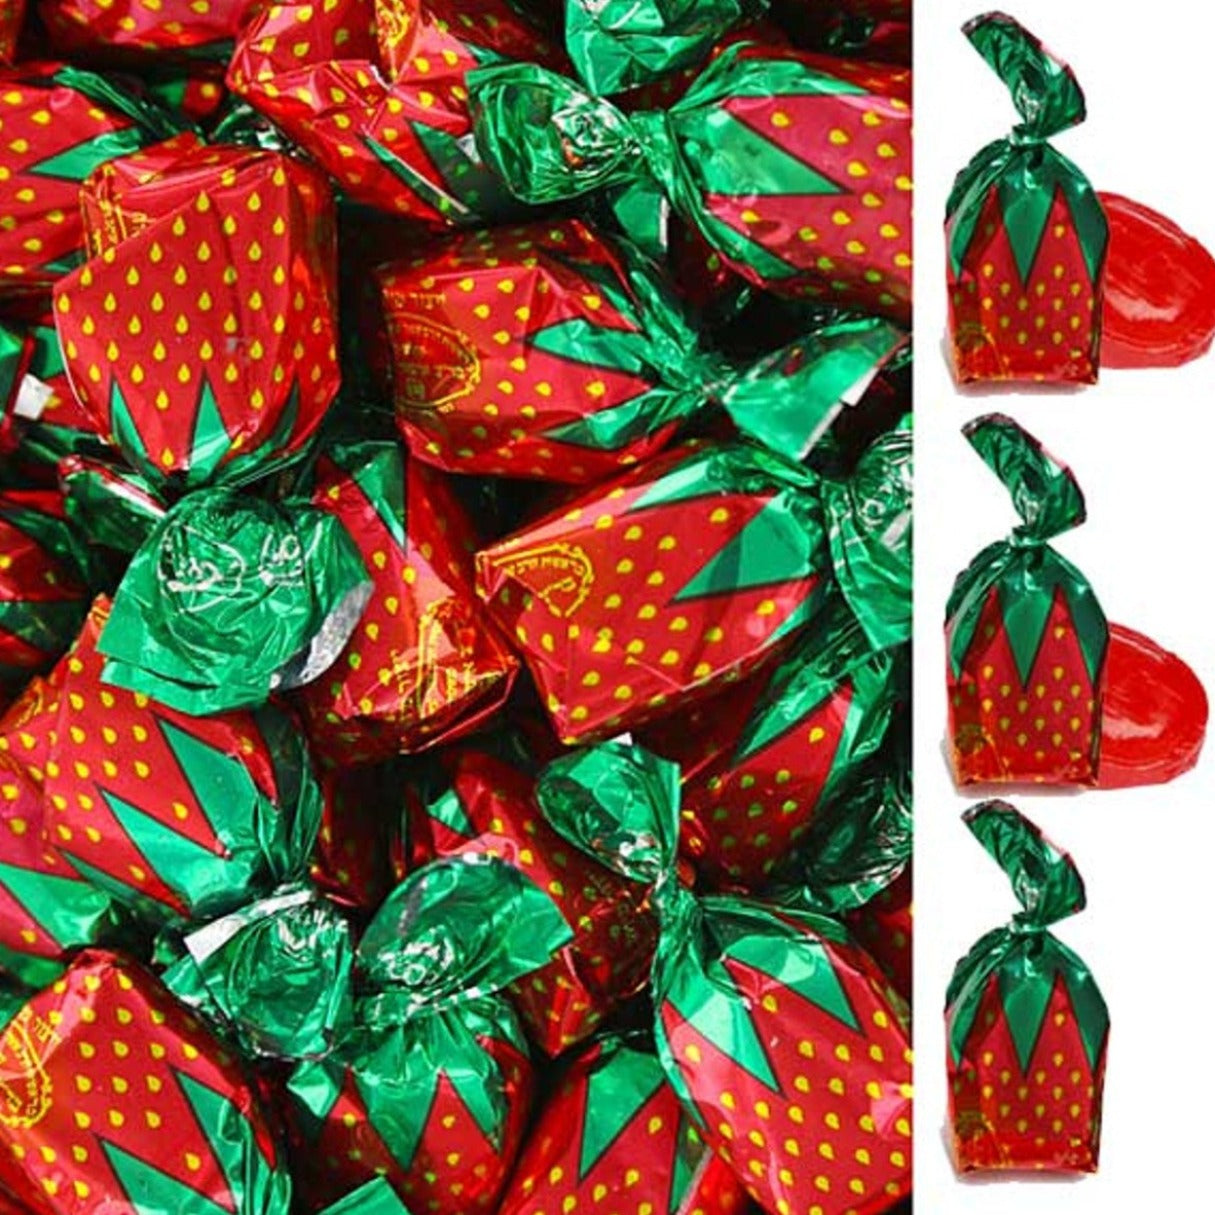 Strawberry Buds Delight Candies Bulk 5lb - 450ct